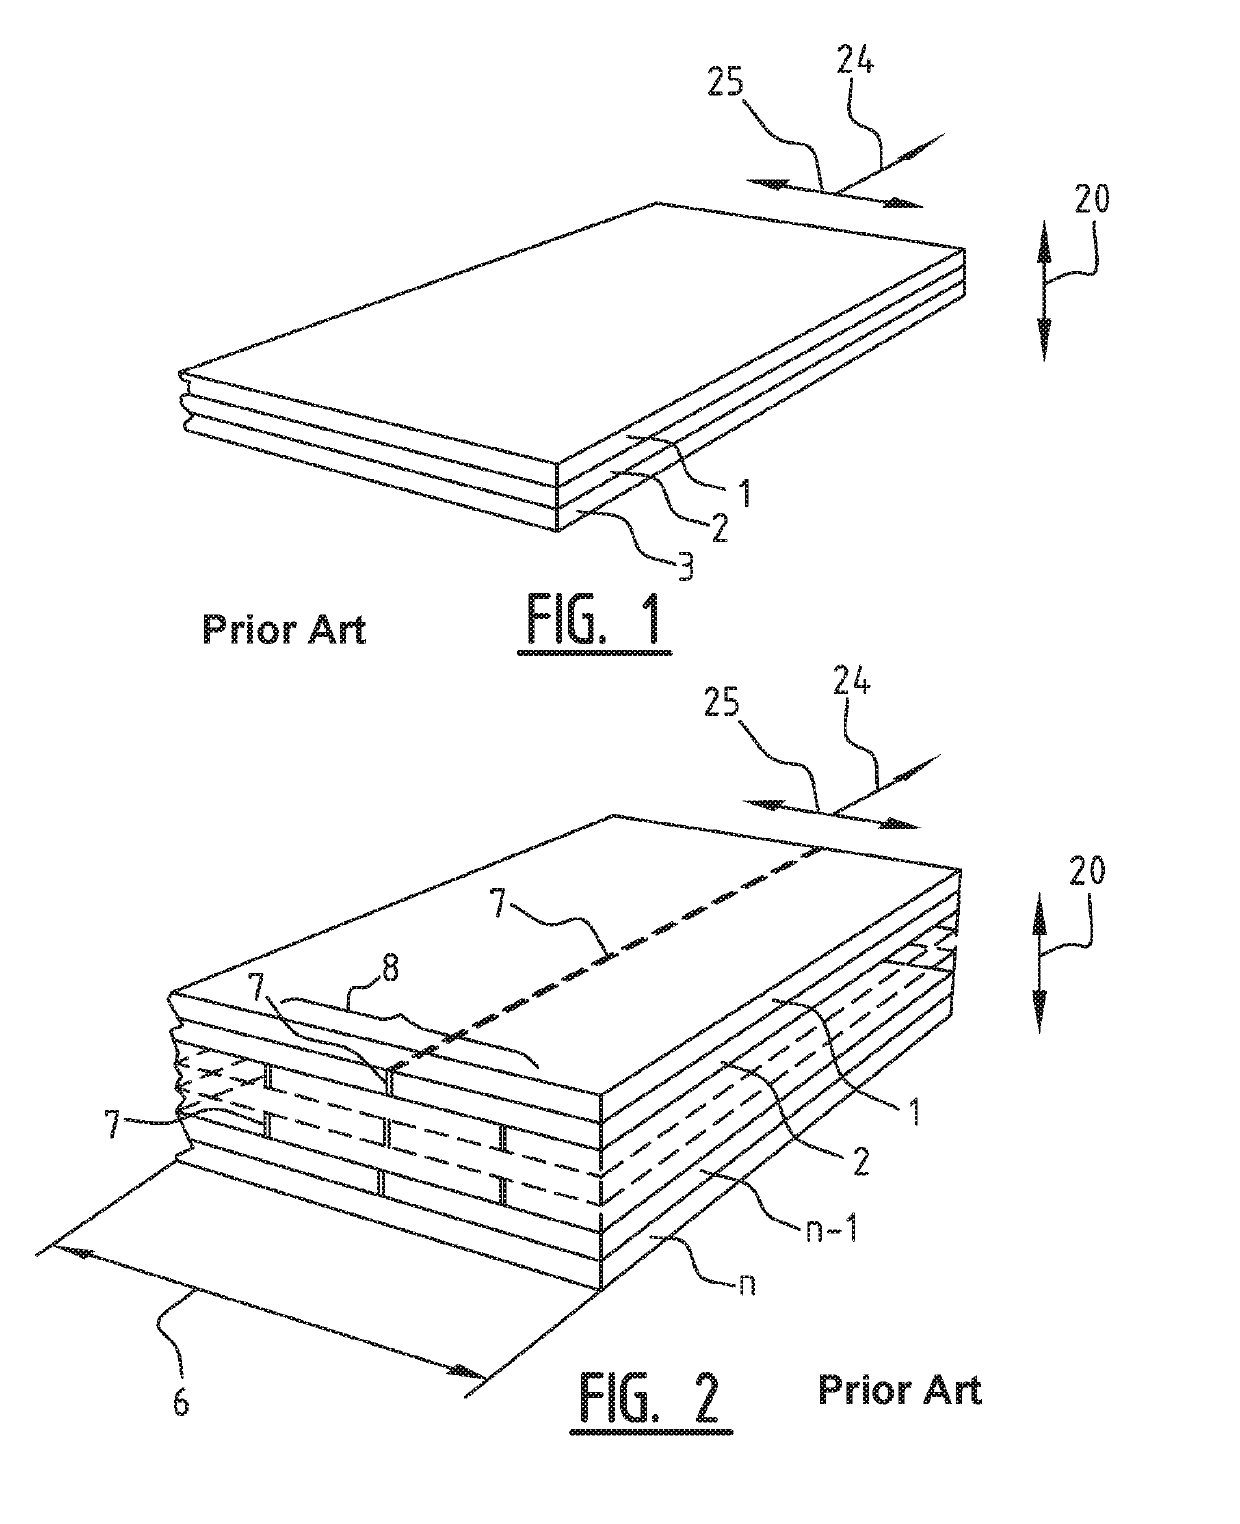 Laminate of Mutually Bonded Adhesive Layers and Metal Sheets, and Method to Obtain Such Laminate